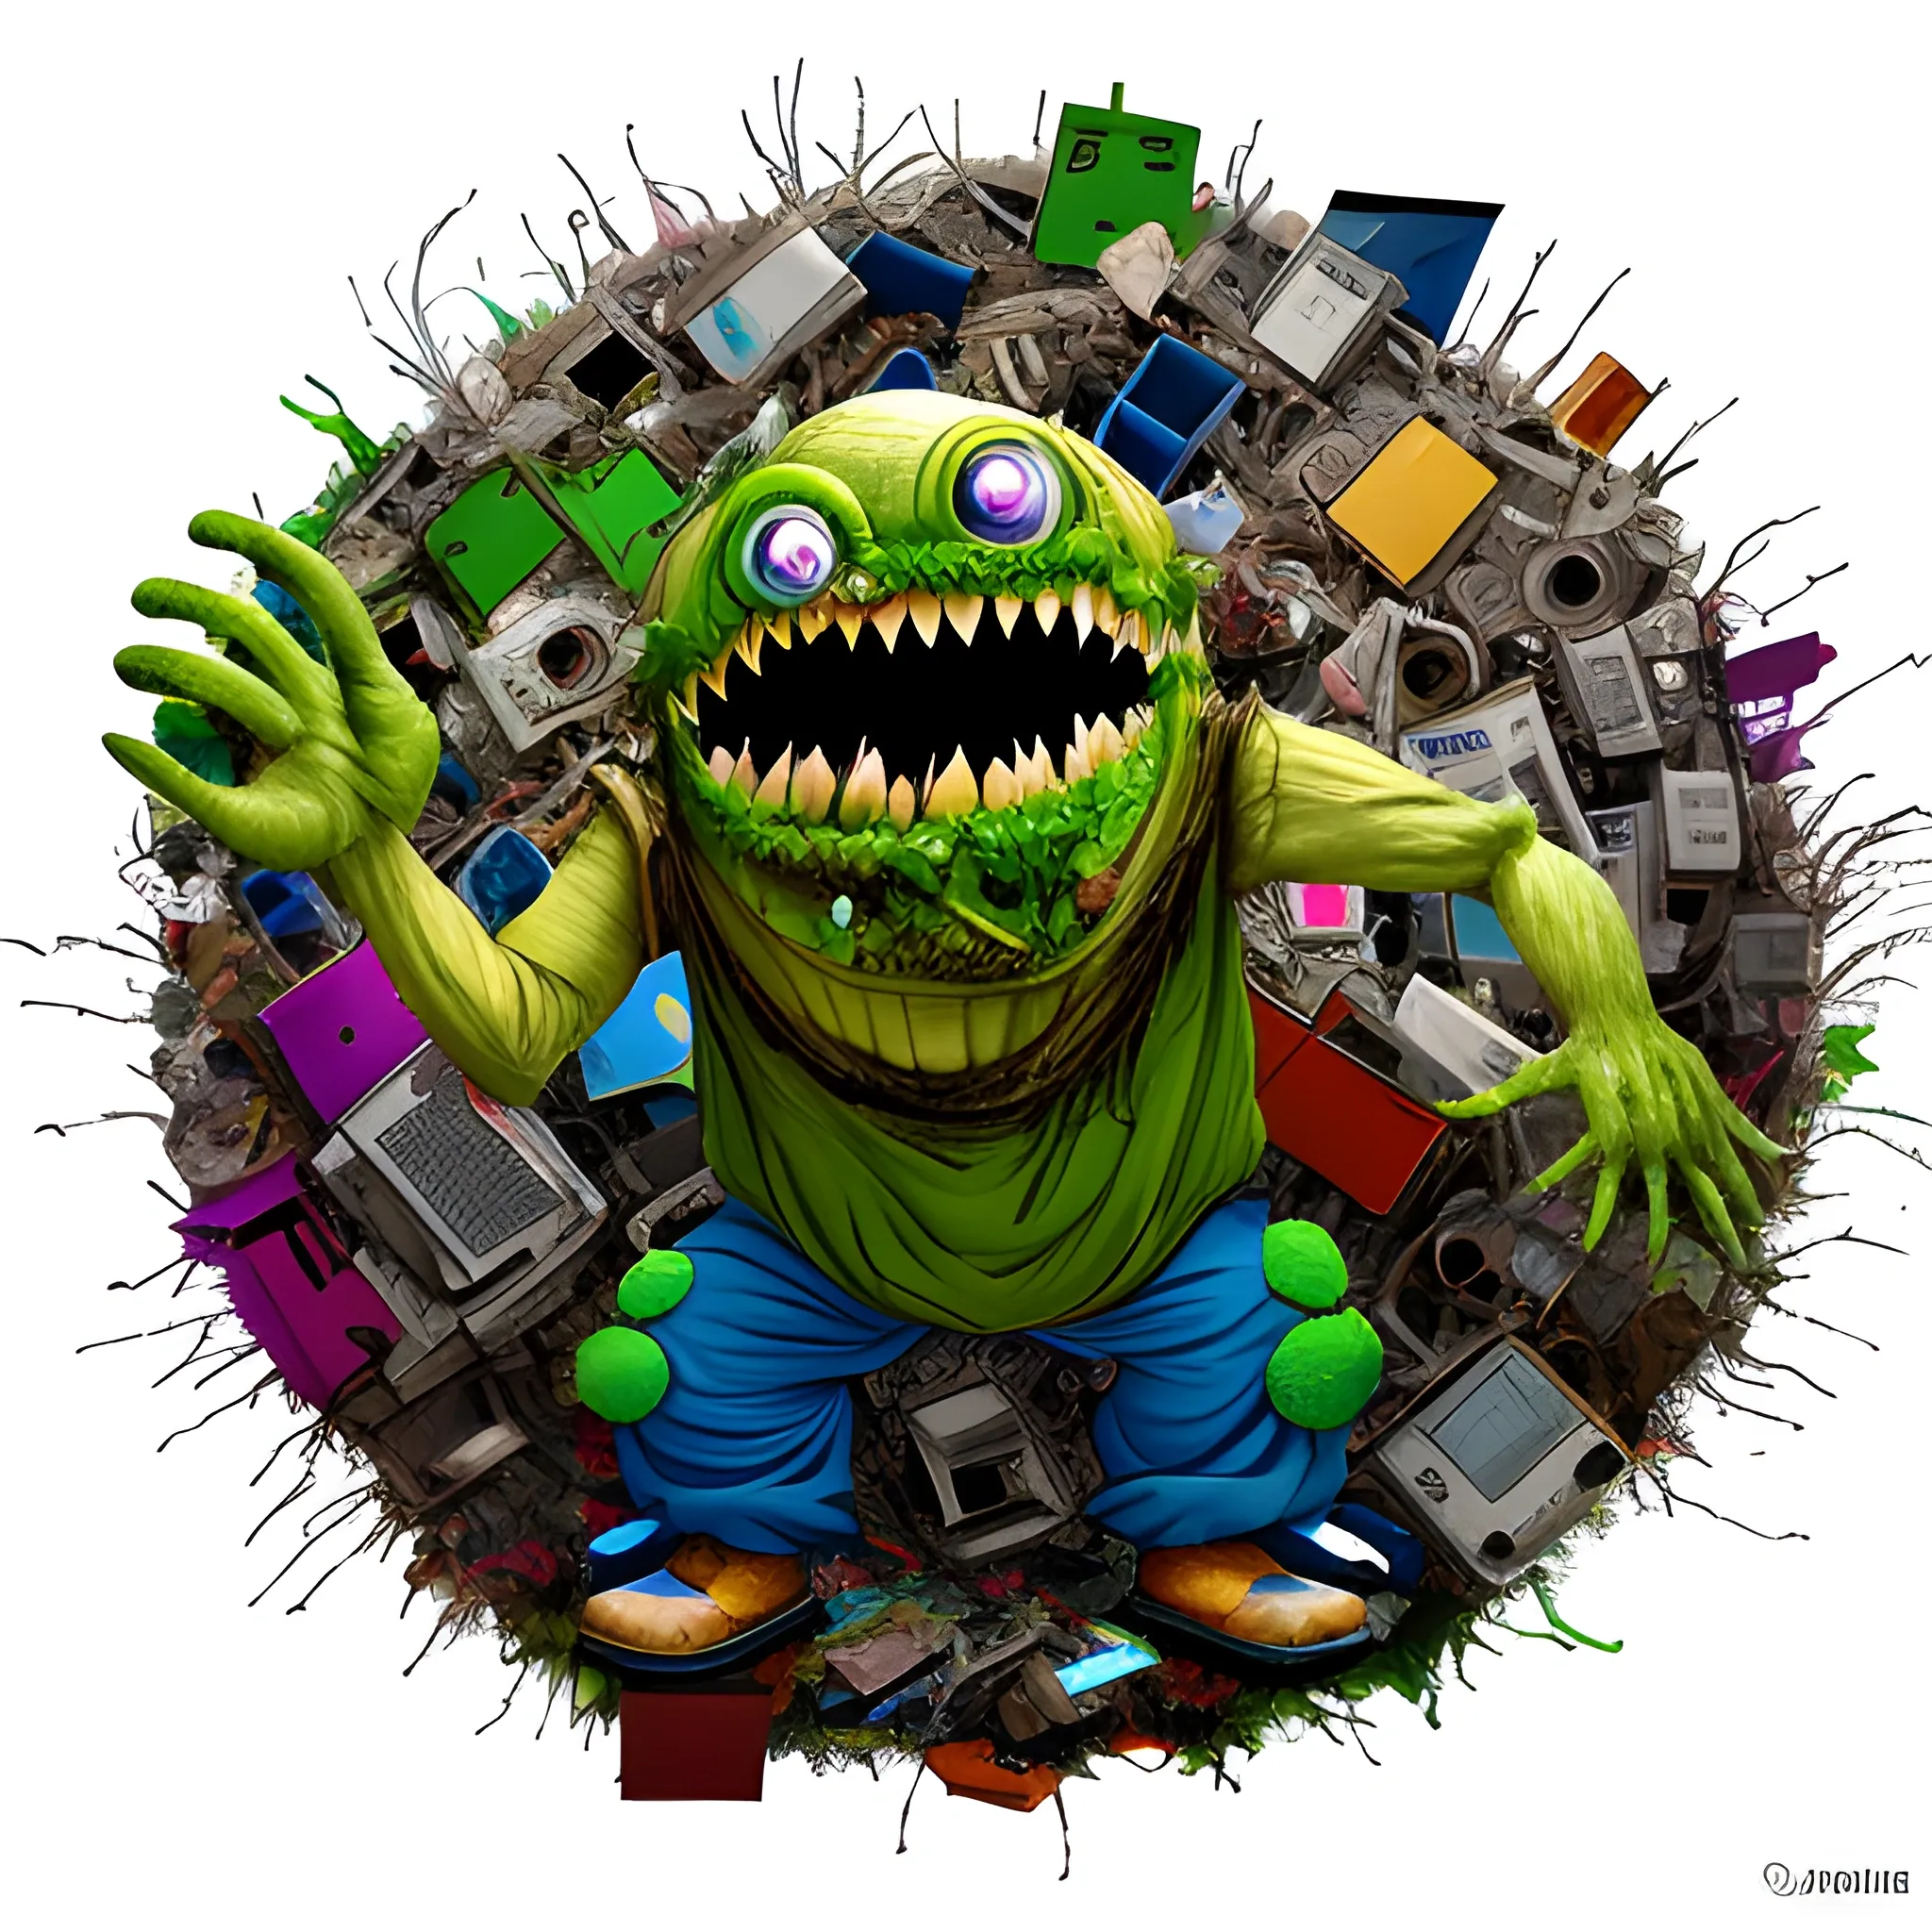 E-Waste Recycling Advertisement 
 
An image of a monster created with electronic waste trying to eat the world. 
the world of intense colors and the monster of low colors., Cartoon